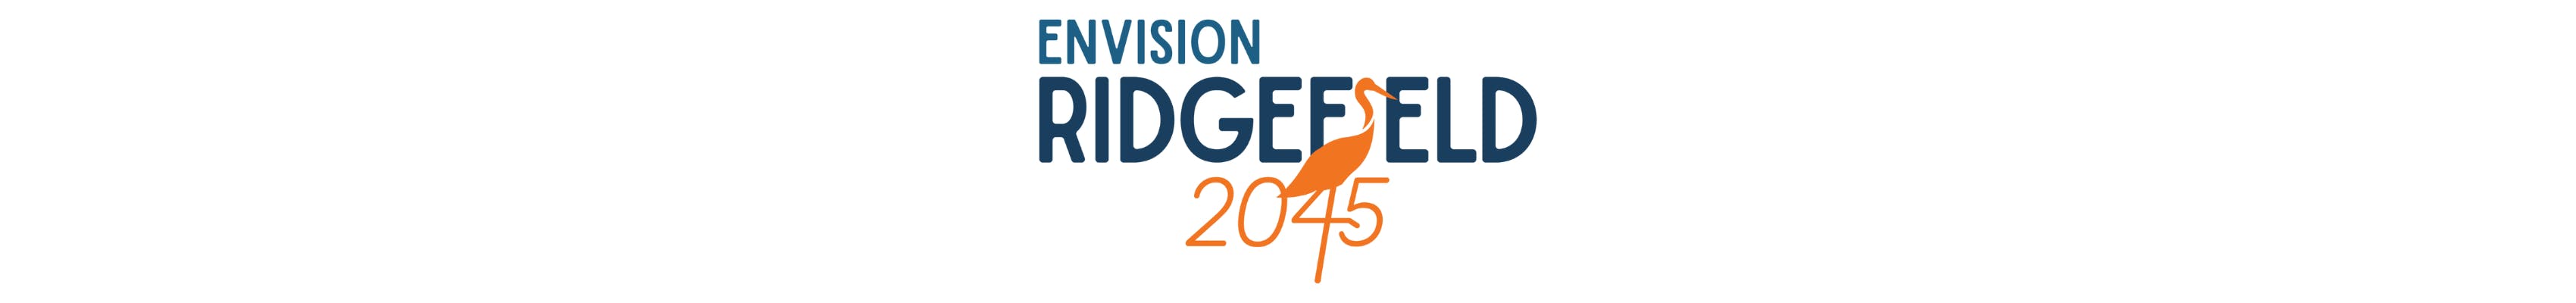 Logo with text 'Envision Ridgefield 2045'